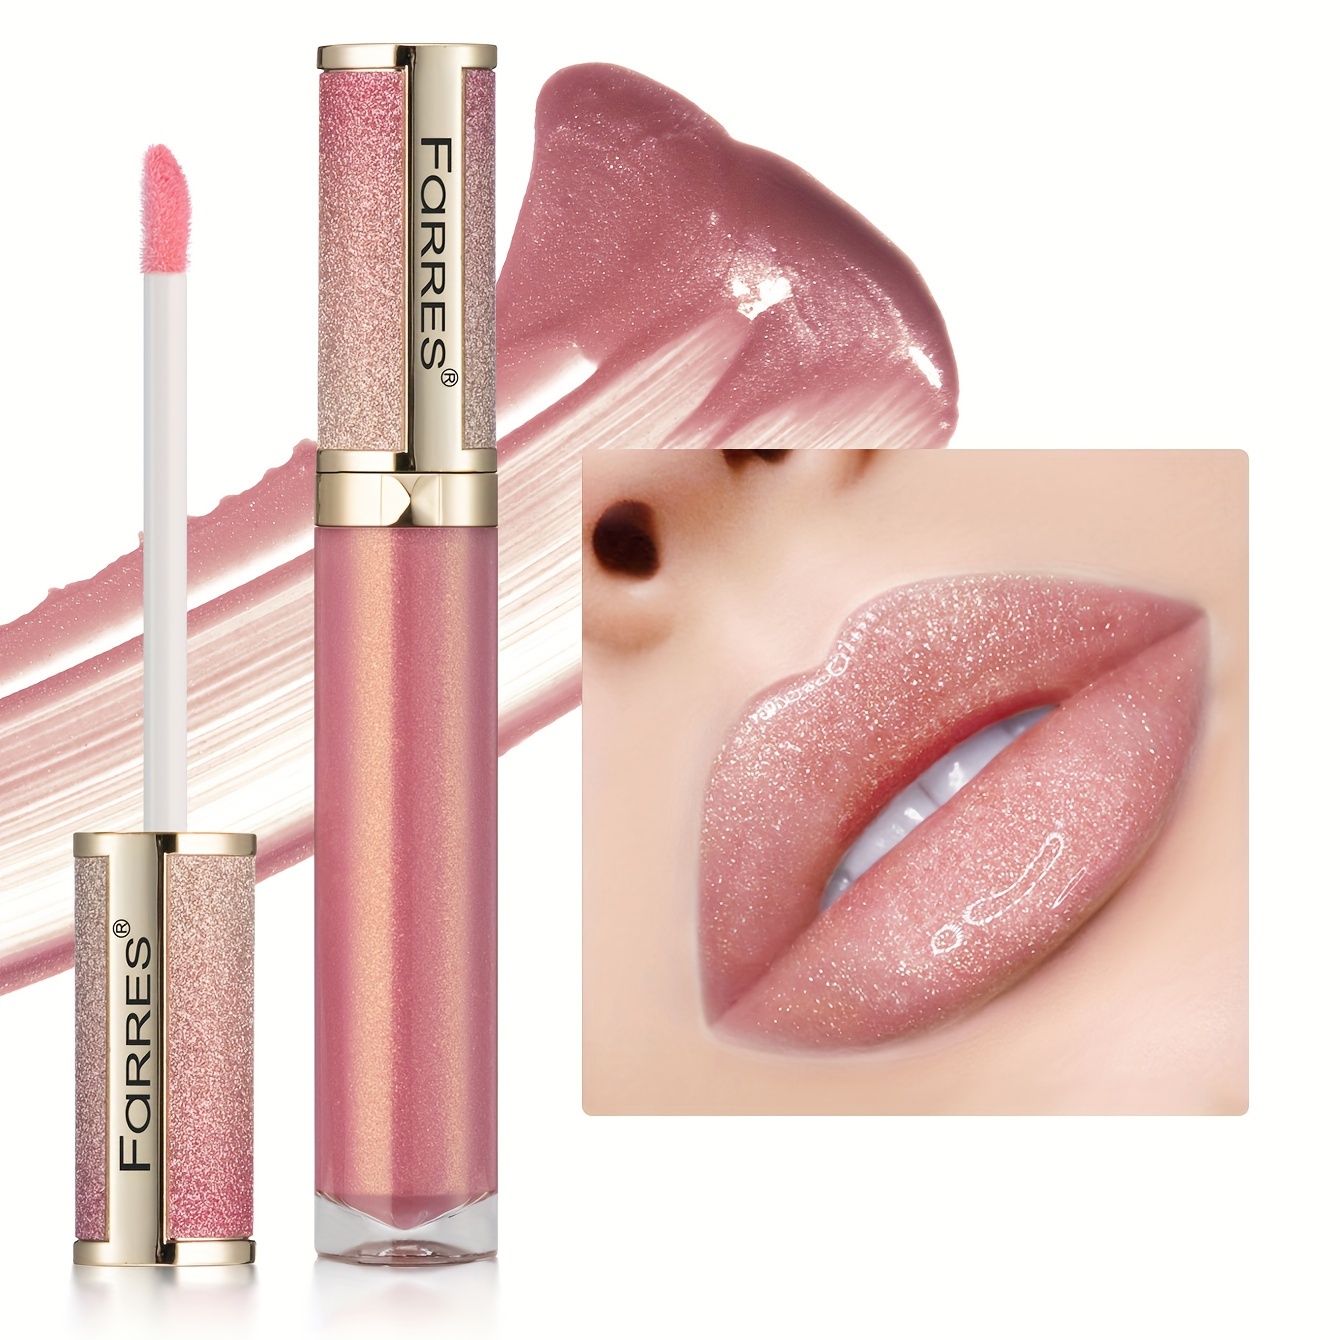 

Pearlescent Glitter Lip Gloss, Moisturizing Hydrating Formula, High-shine Glass Mirror Finish, Non-smudge Daily Wear For All Skin Types